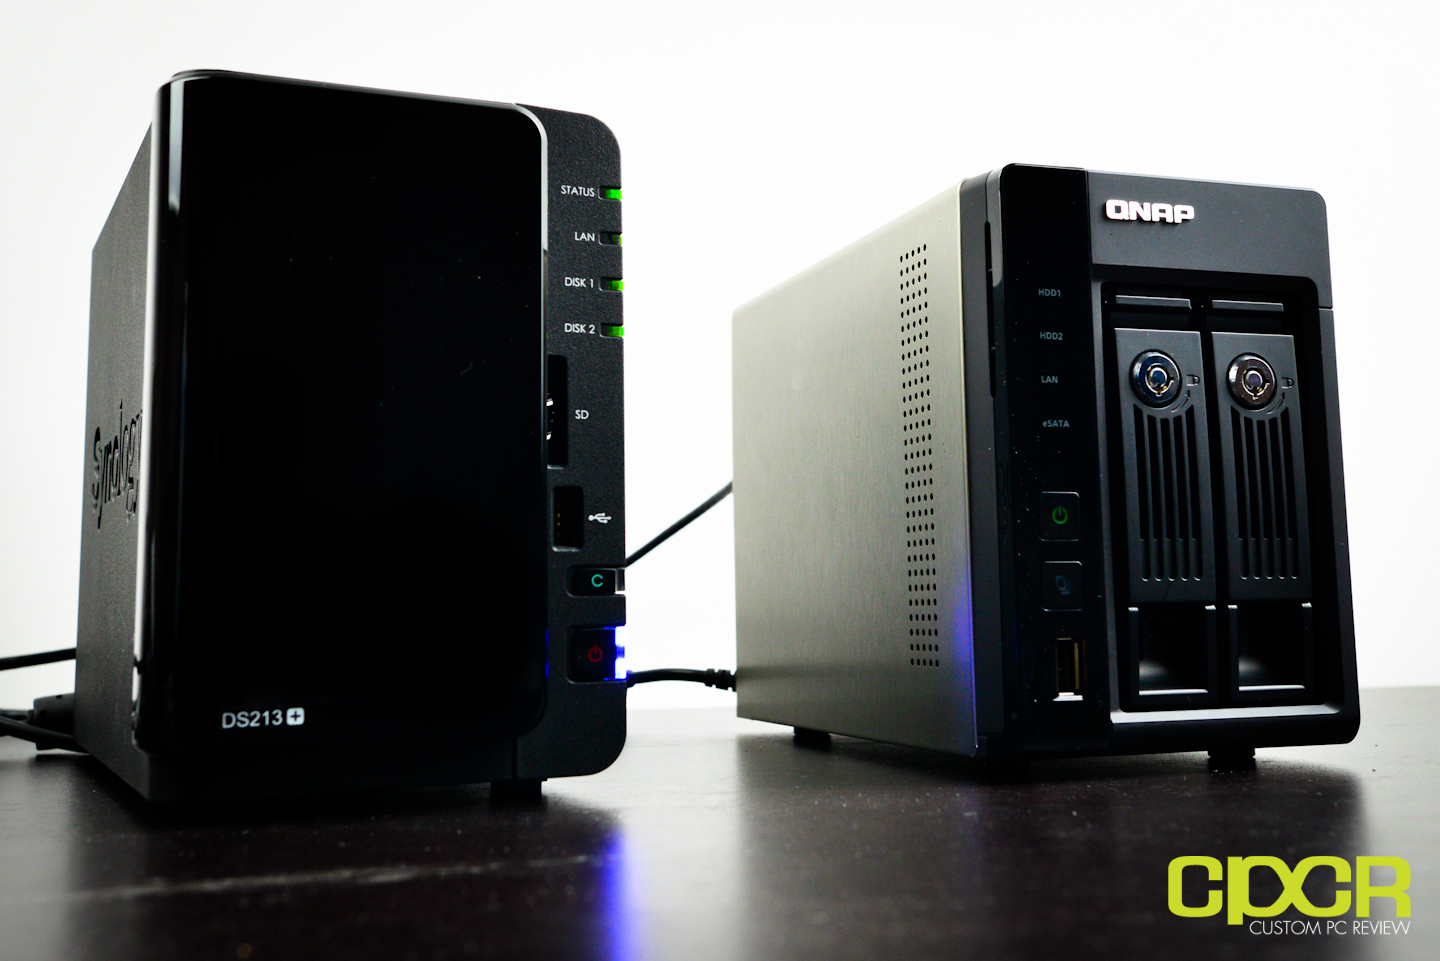 Two 2 Bay NAS Review: Synology DiskStation DS213+ and QNAP TS-269 Pro